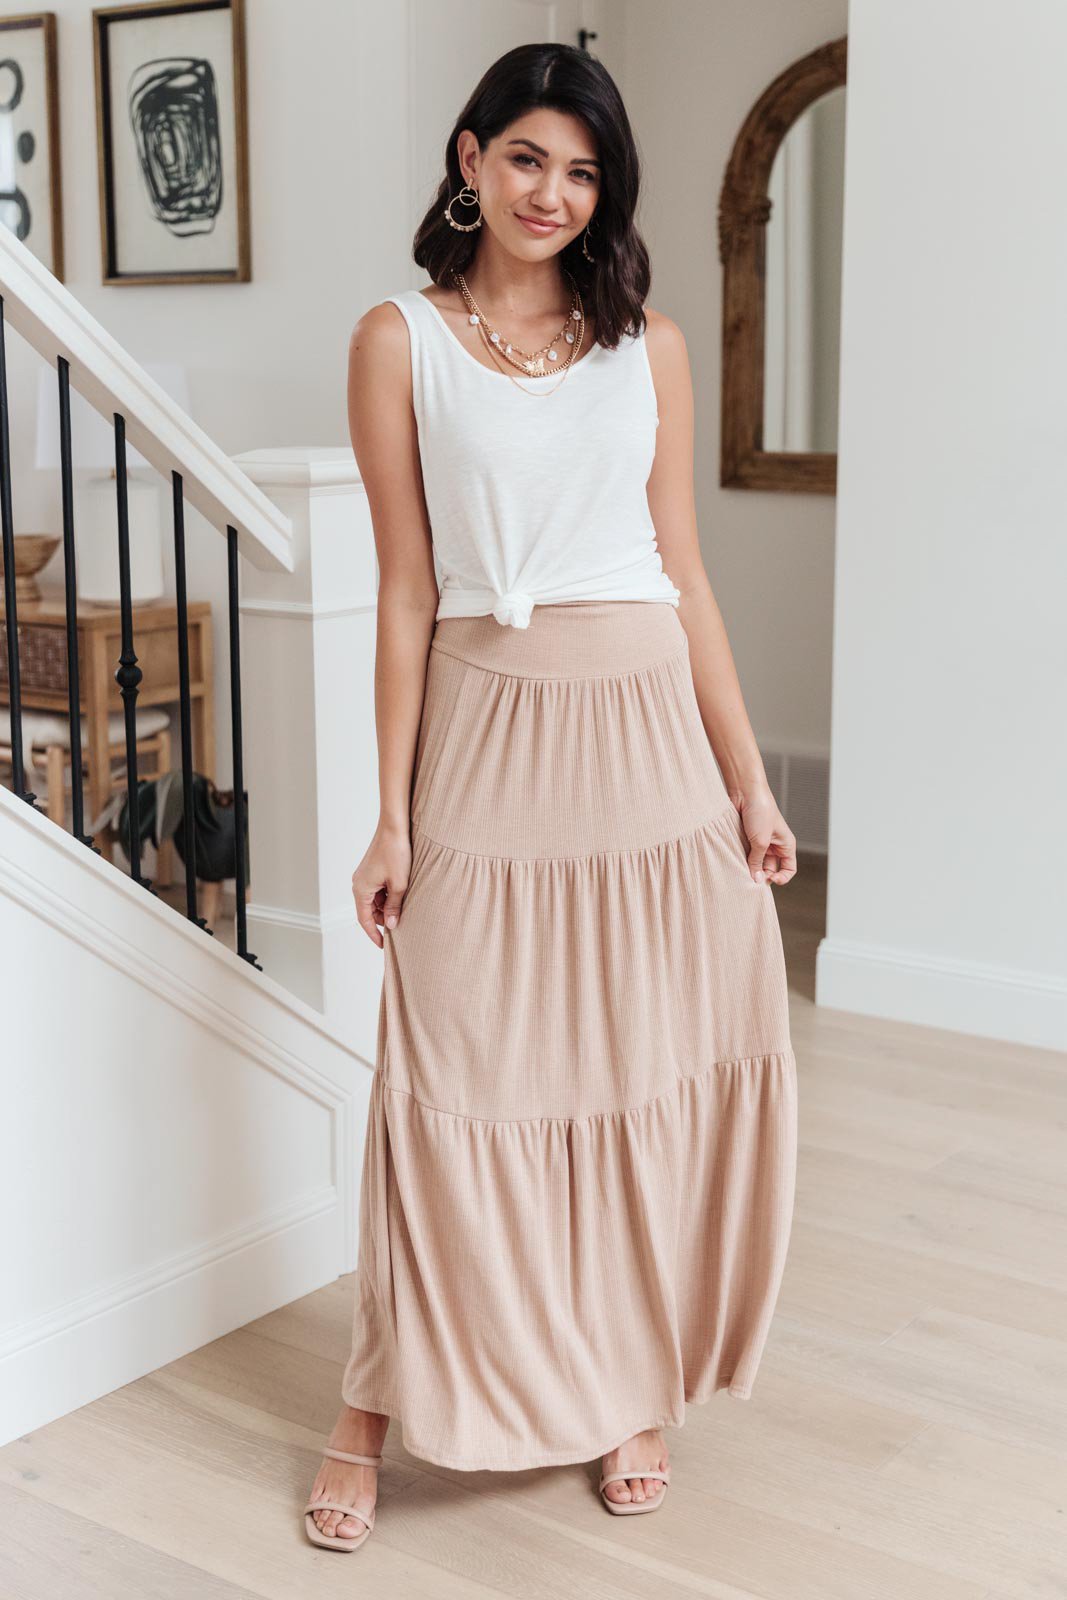 Roam The World Skirt in Taupe (Online Exclusive)